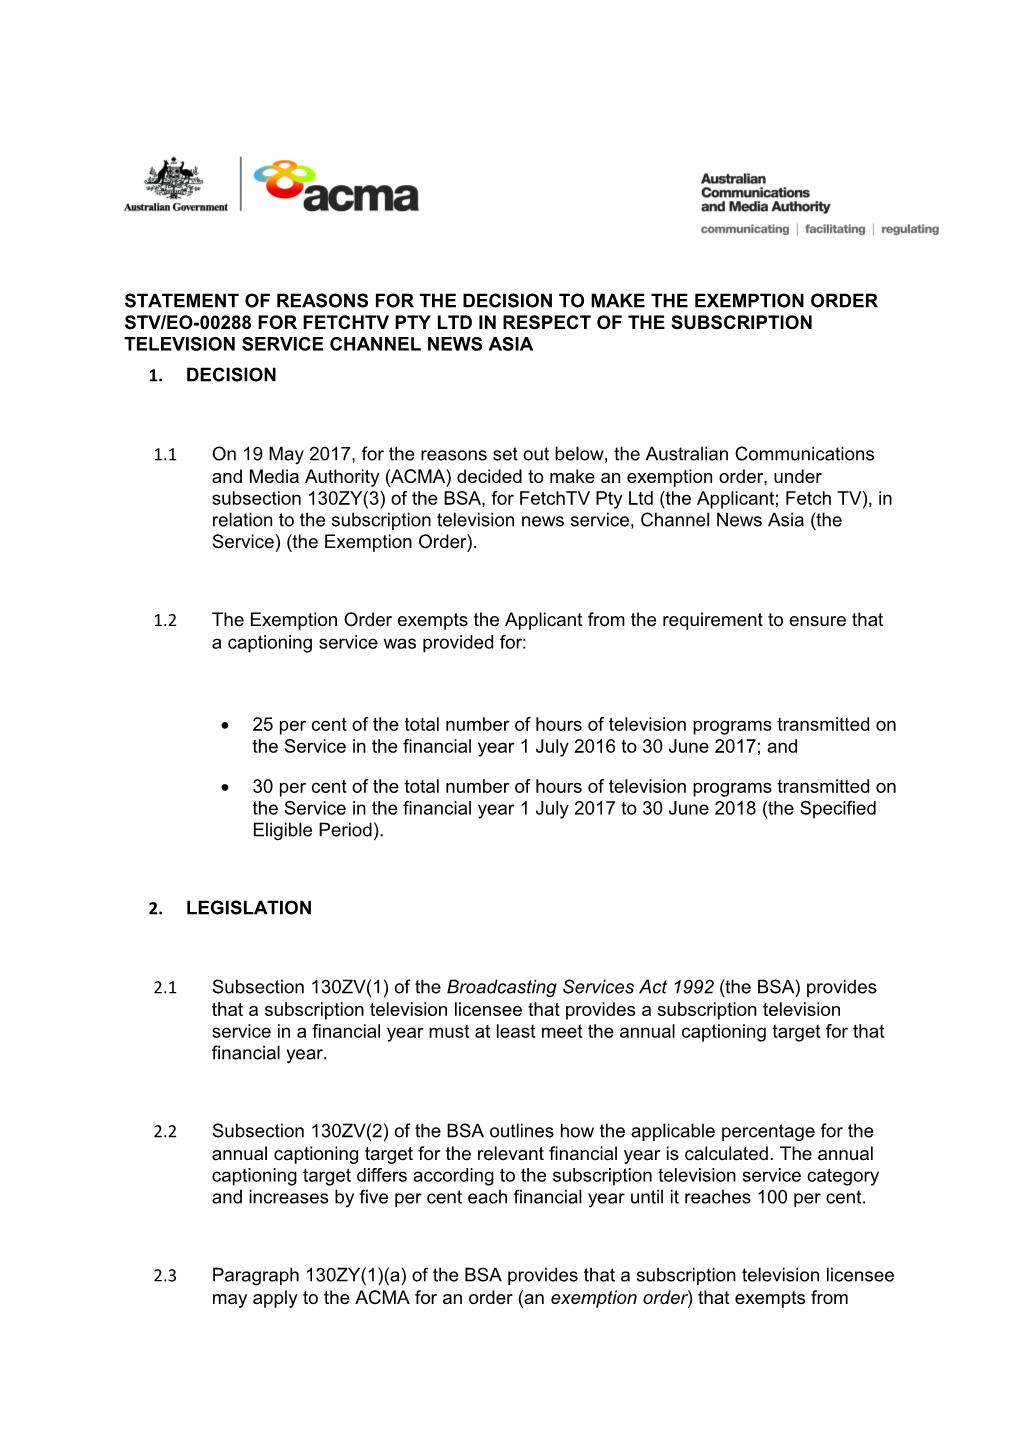 Statement of Reasons for the Decision to Make the Exemption Order Stv/Eo-00288 for Fetchtv